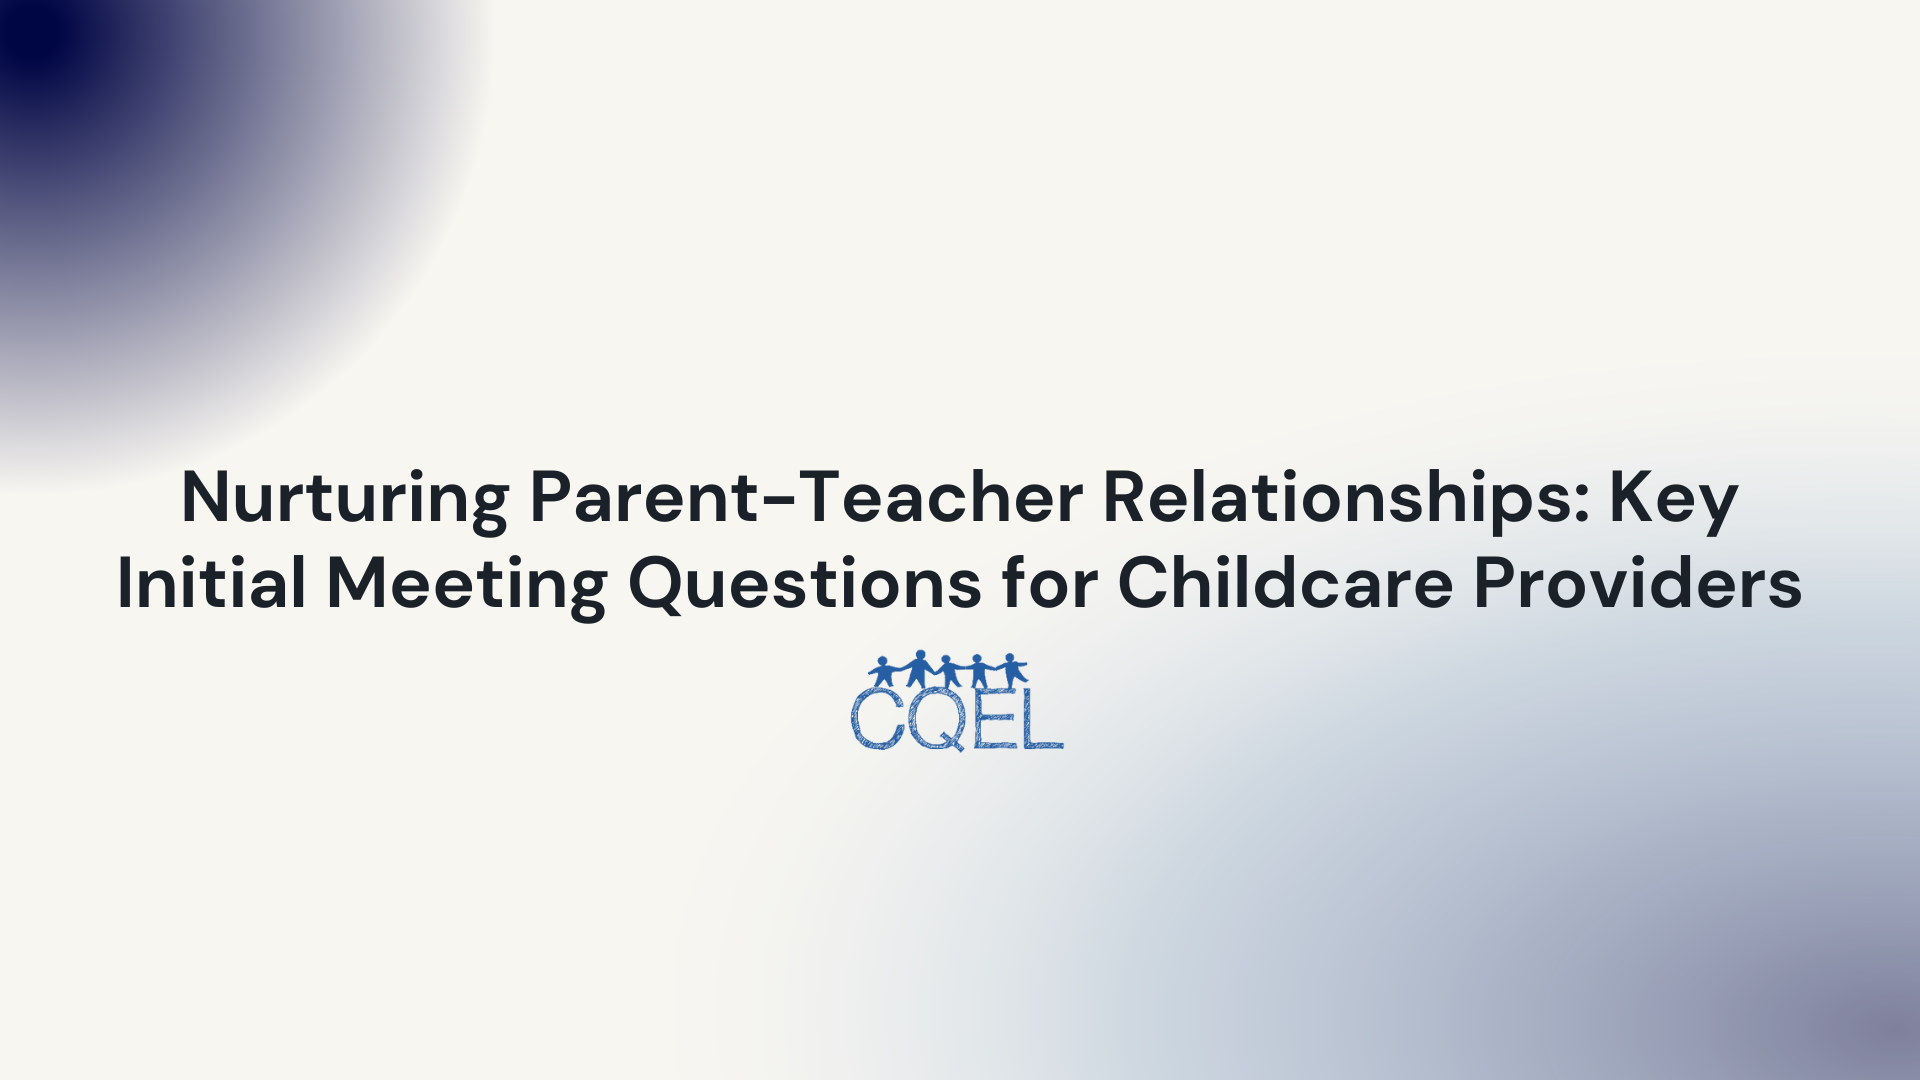 Nurturing Parent-Teacher Relationships: Key Initial Meeting Questions for Childcare Providers